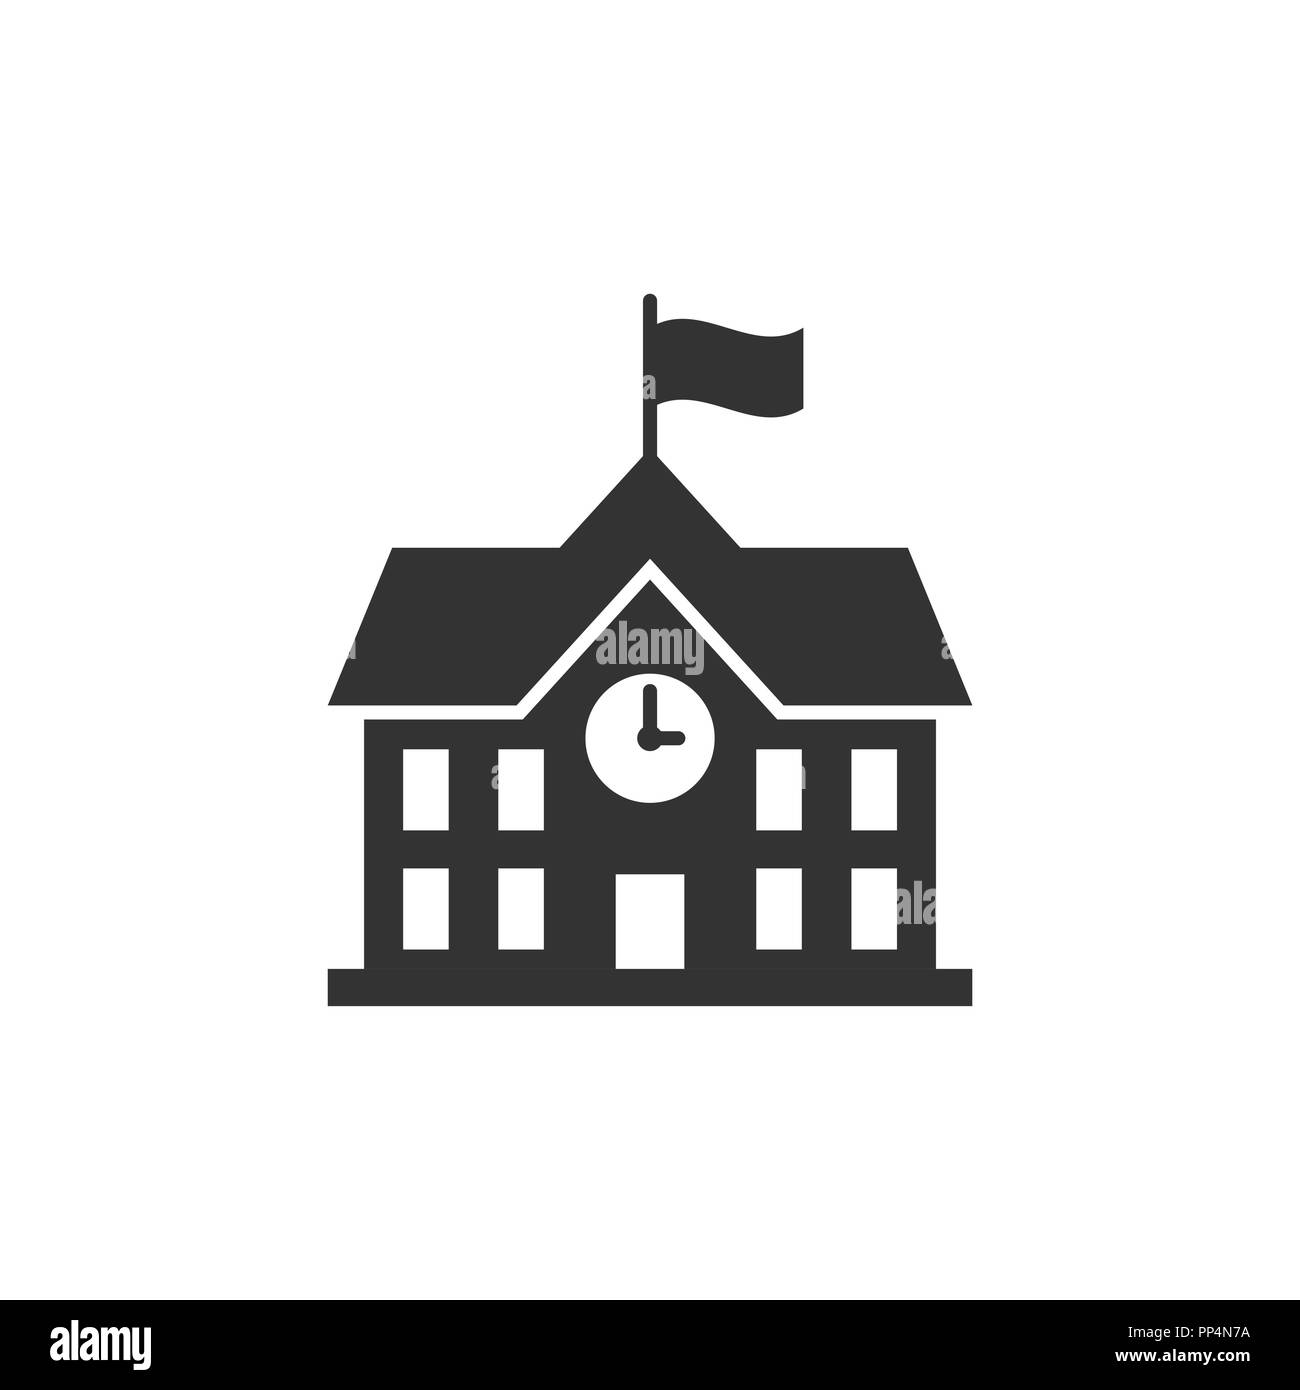 School building icon in flat style. College education vector illustration on white isolated background. Bank, government business concept. Stock Vector